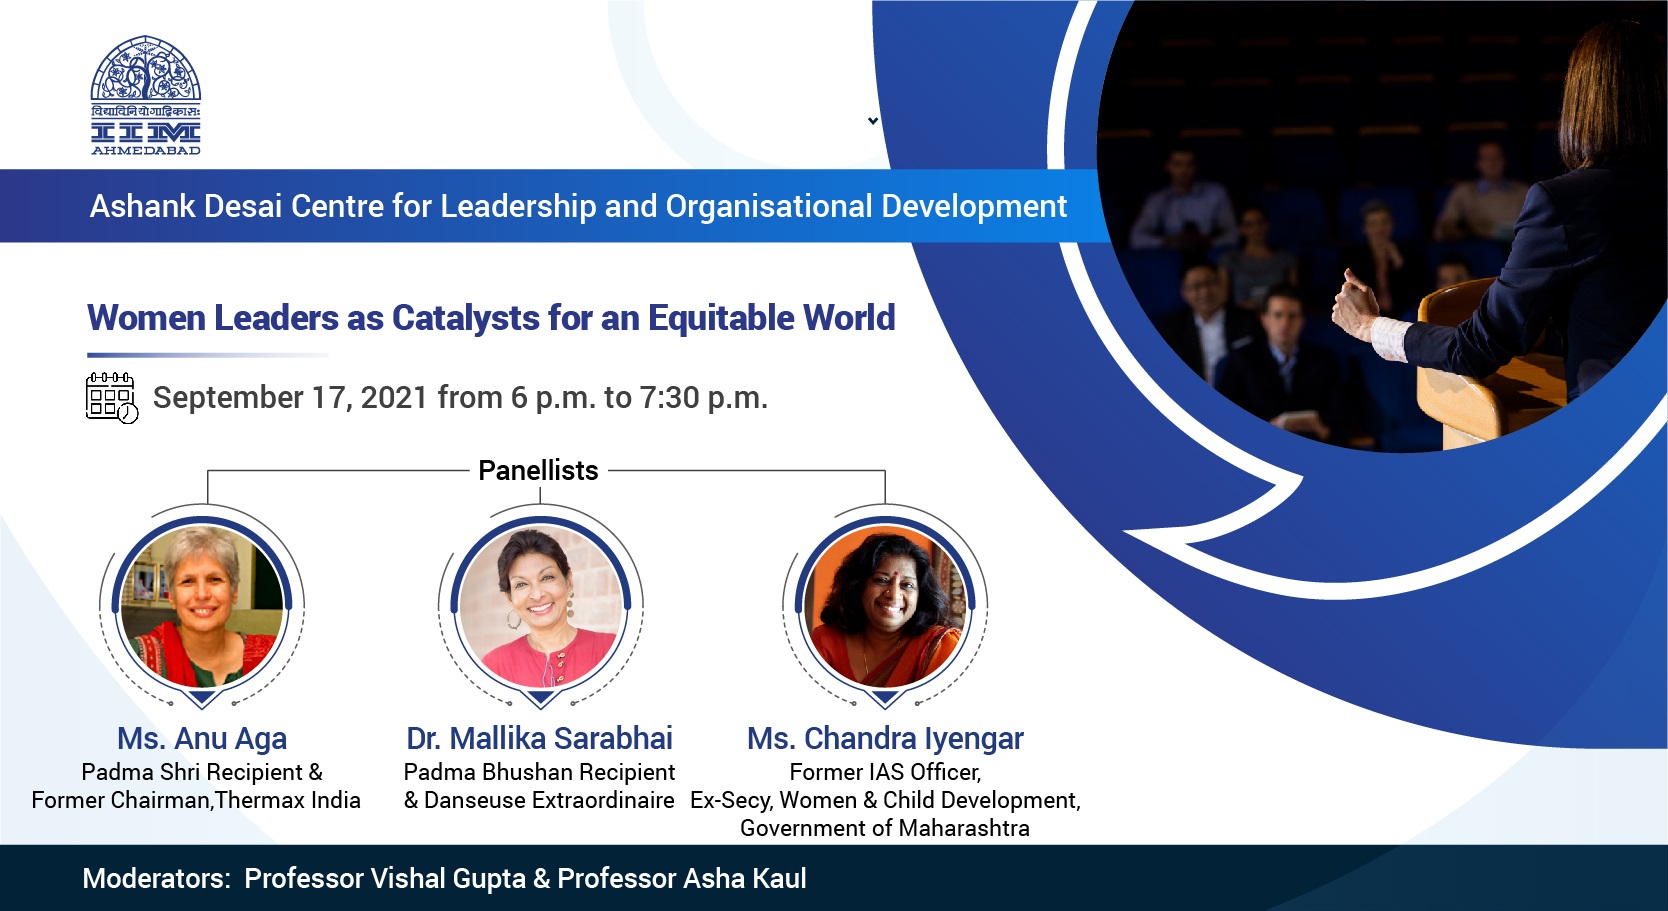 The panel discussion on “Women Leaders as Catalysts for an Equitable World”